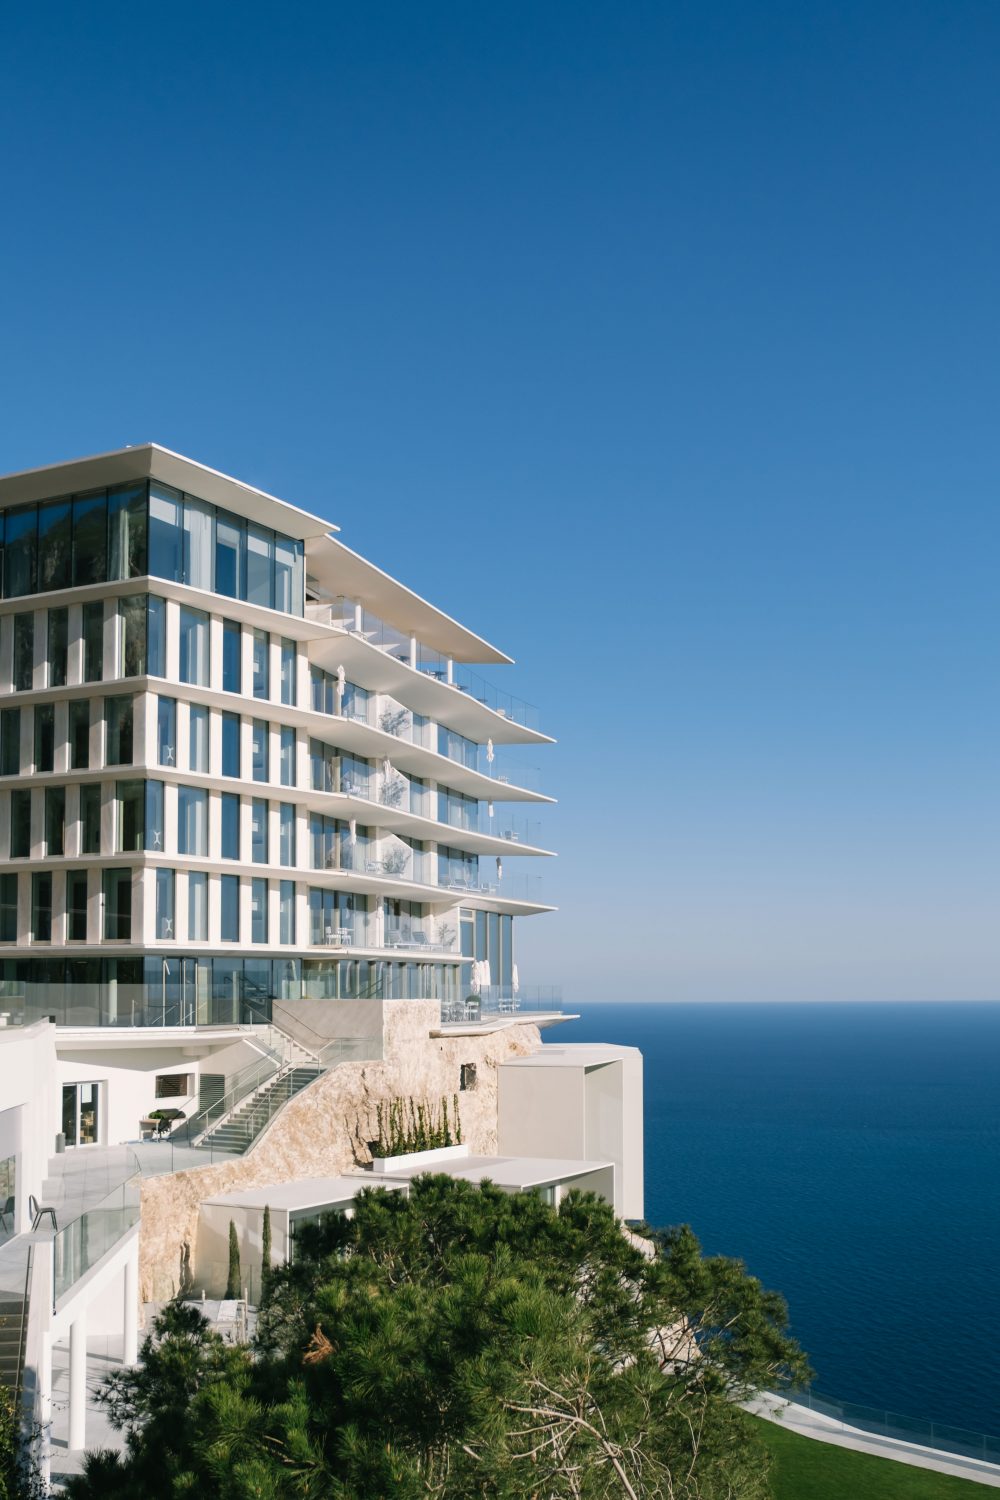 The Maybourne Riviera offers refined elegance on France’s Côte d’Azur